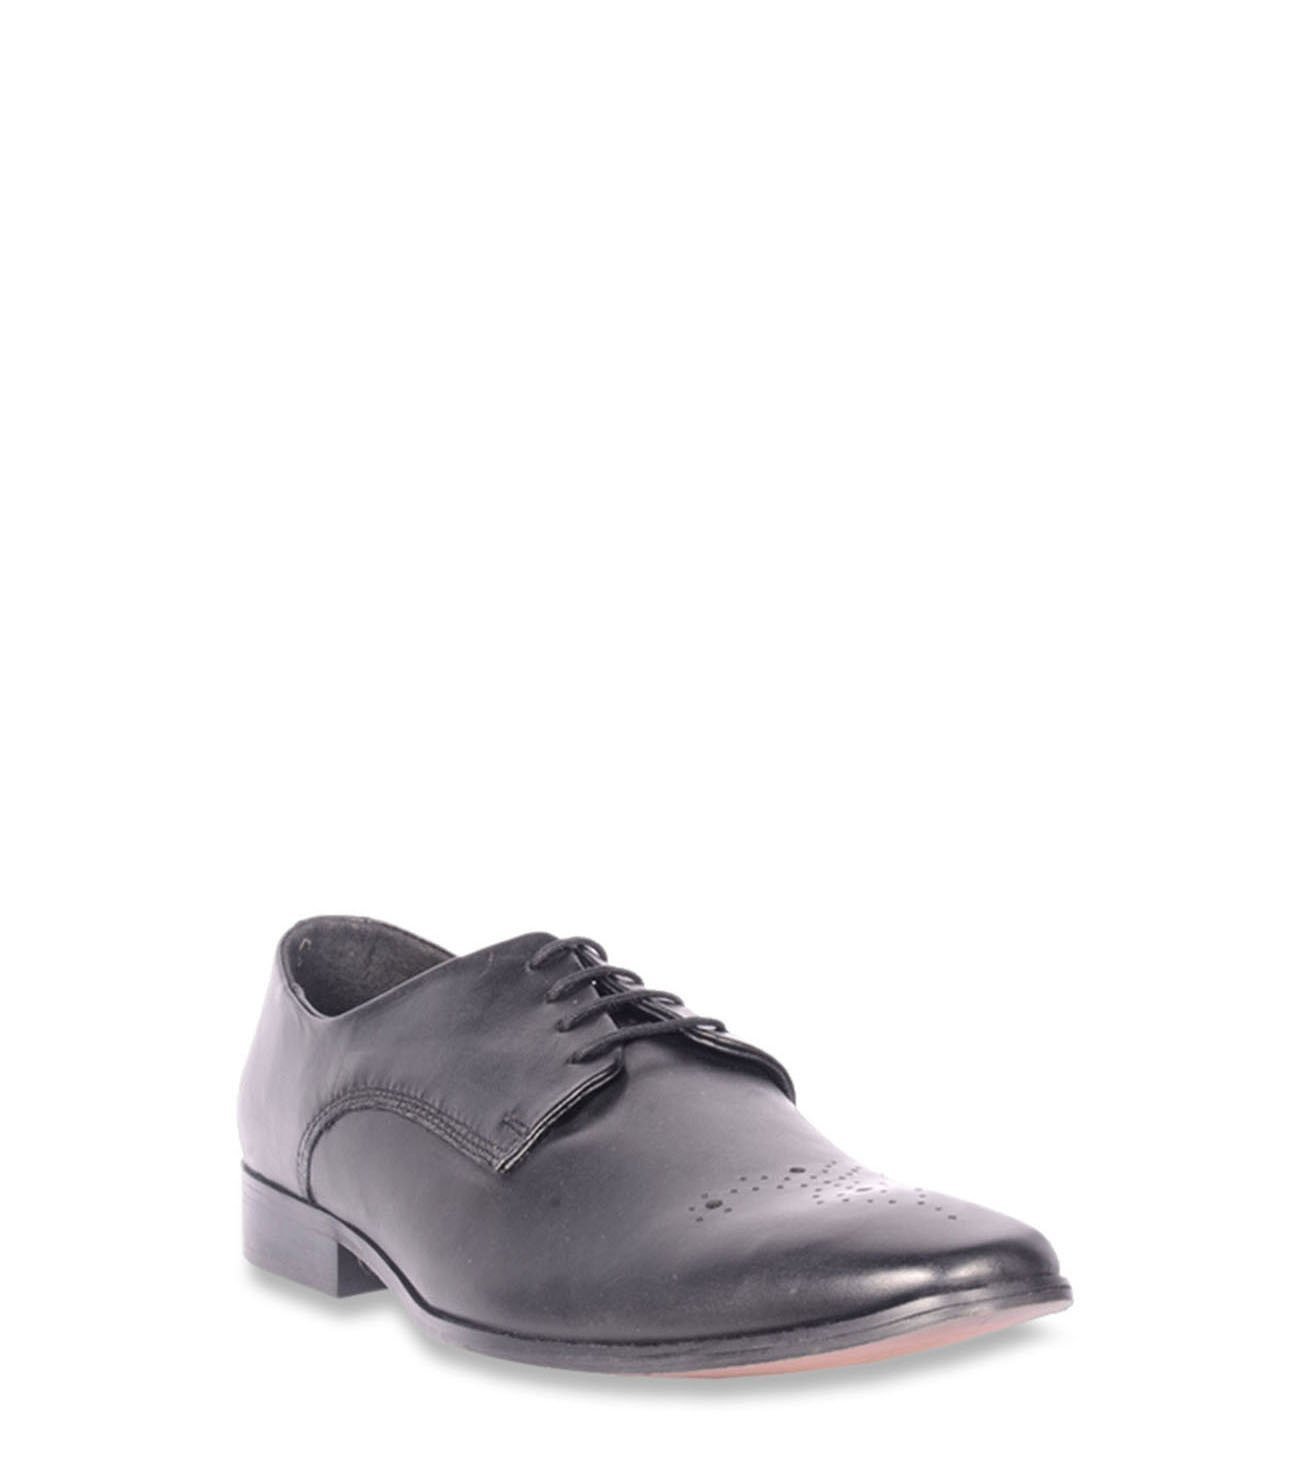 madden girl oxford shoes